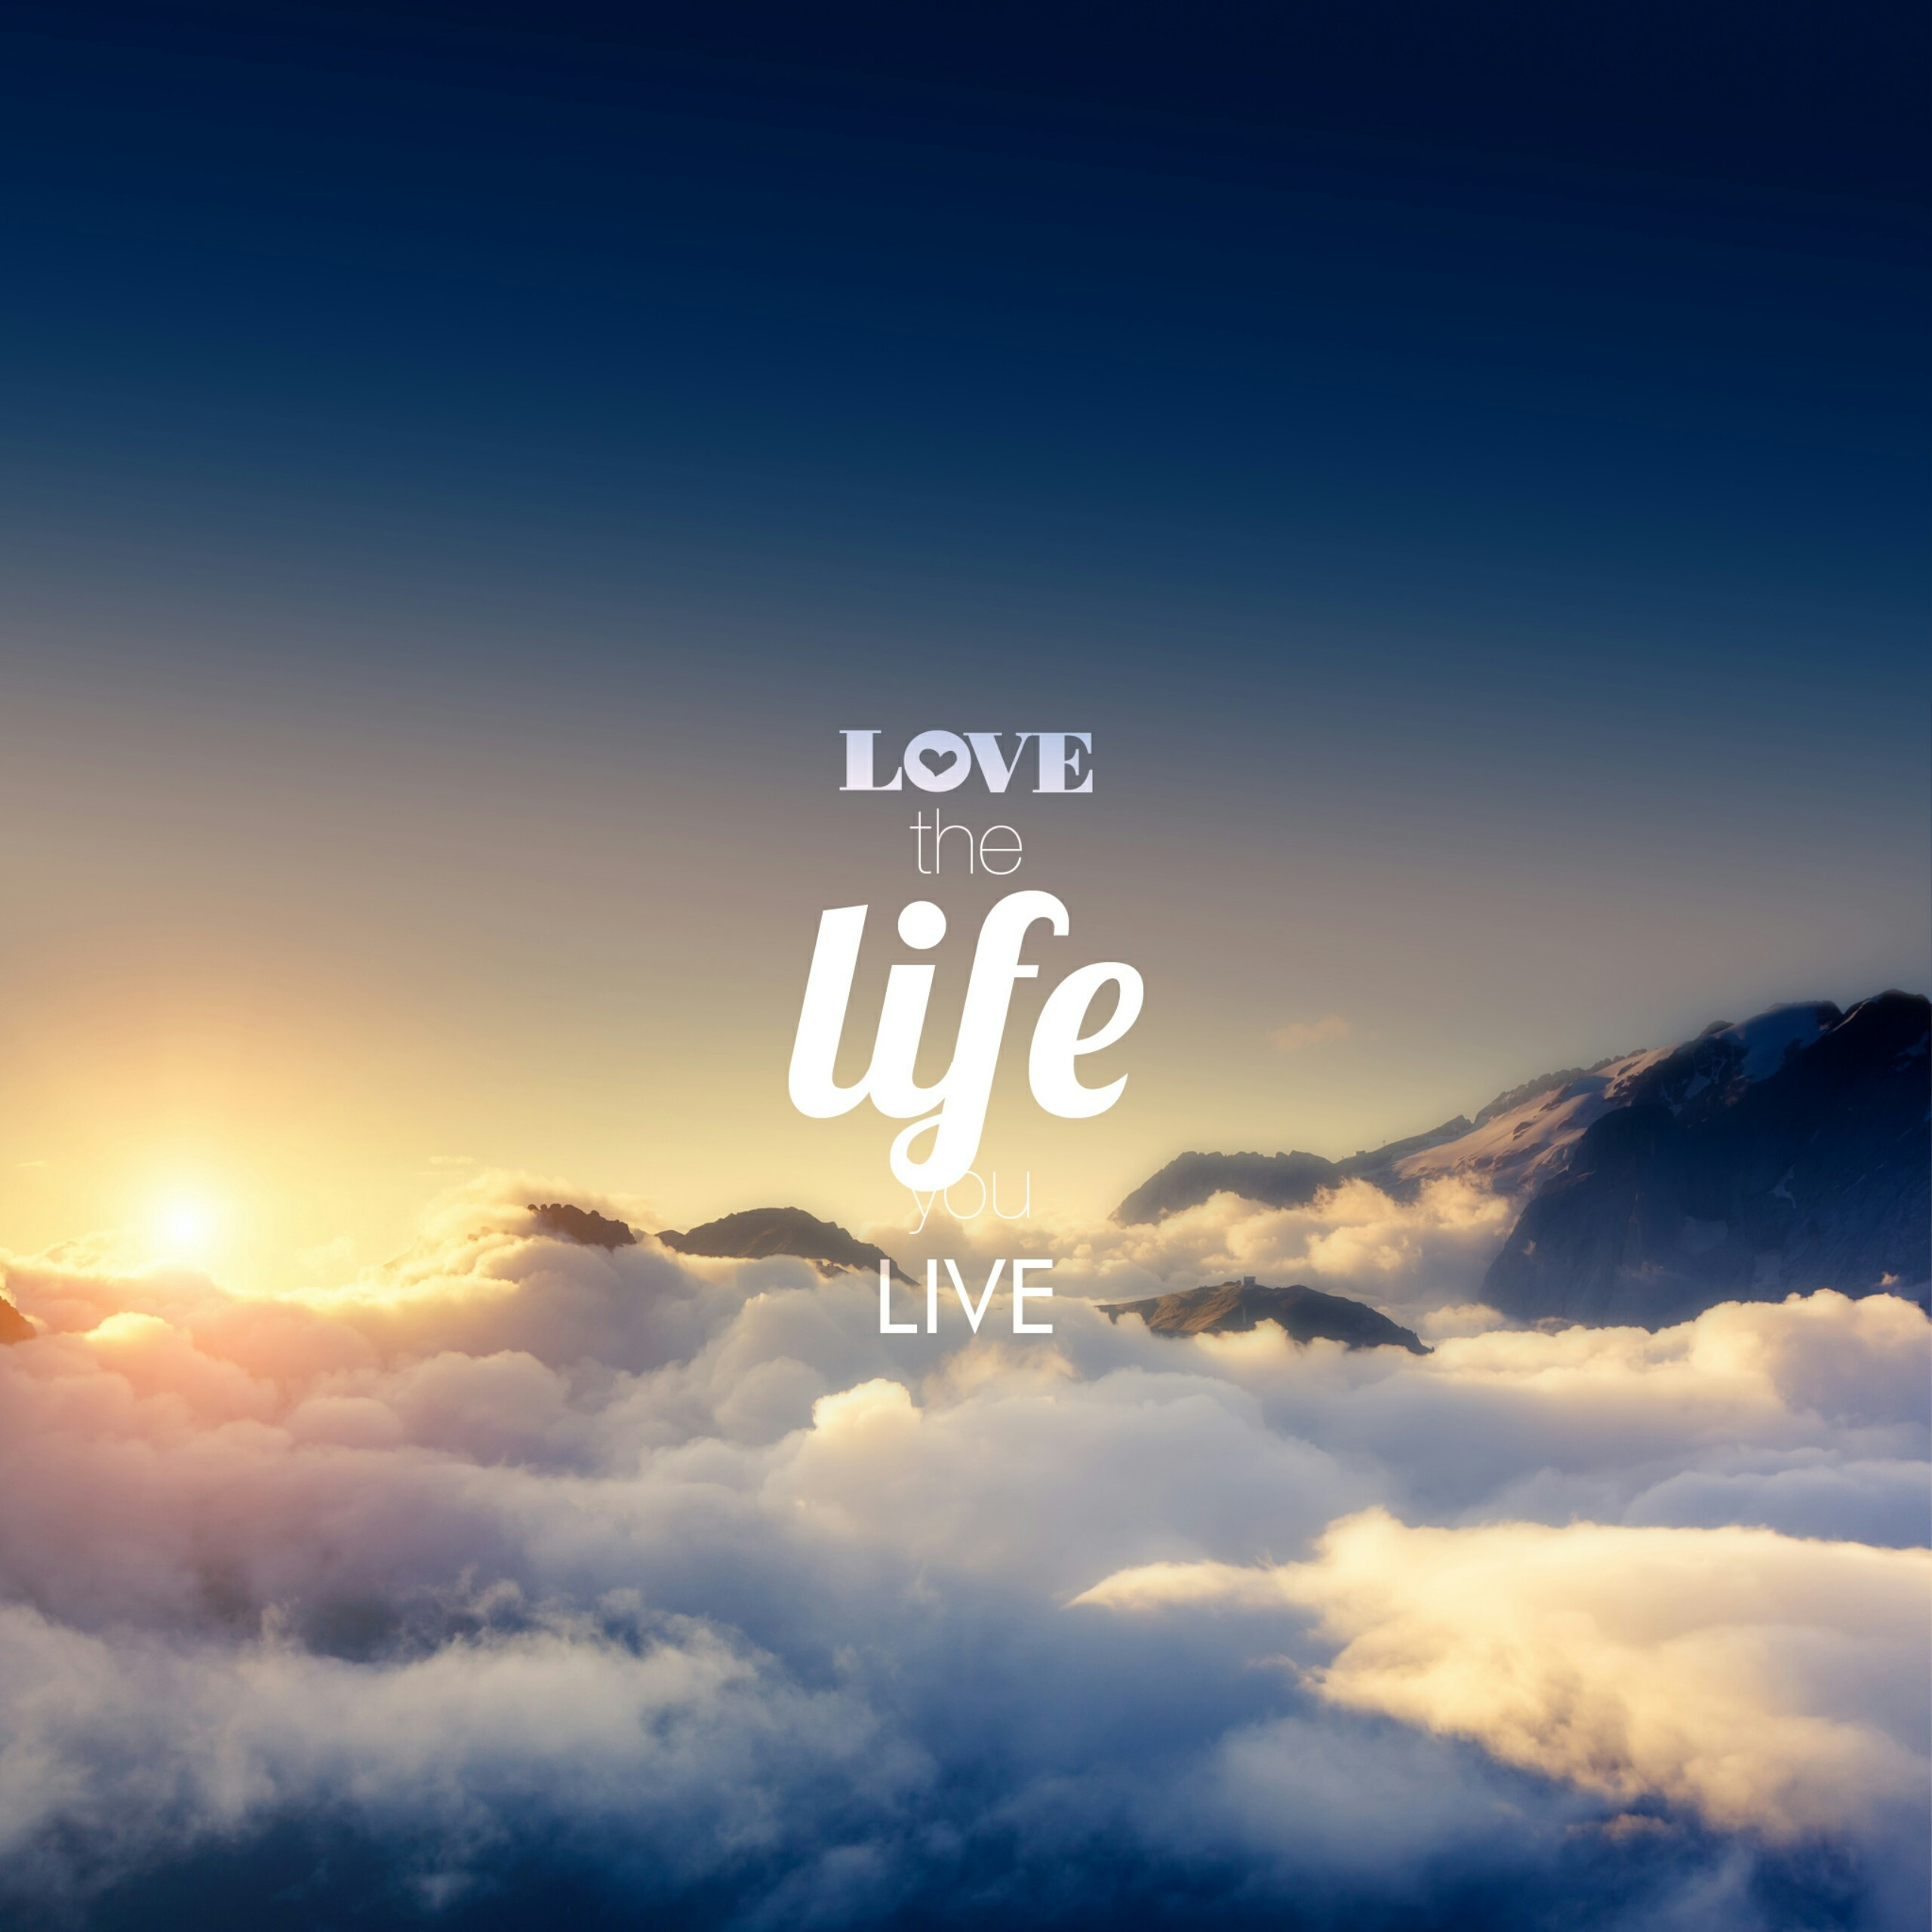 Love The Life You Live Quotes
 Love the Life You Live Quotes QHD Wallpaper Wallpaper